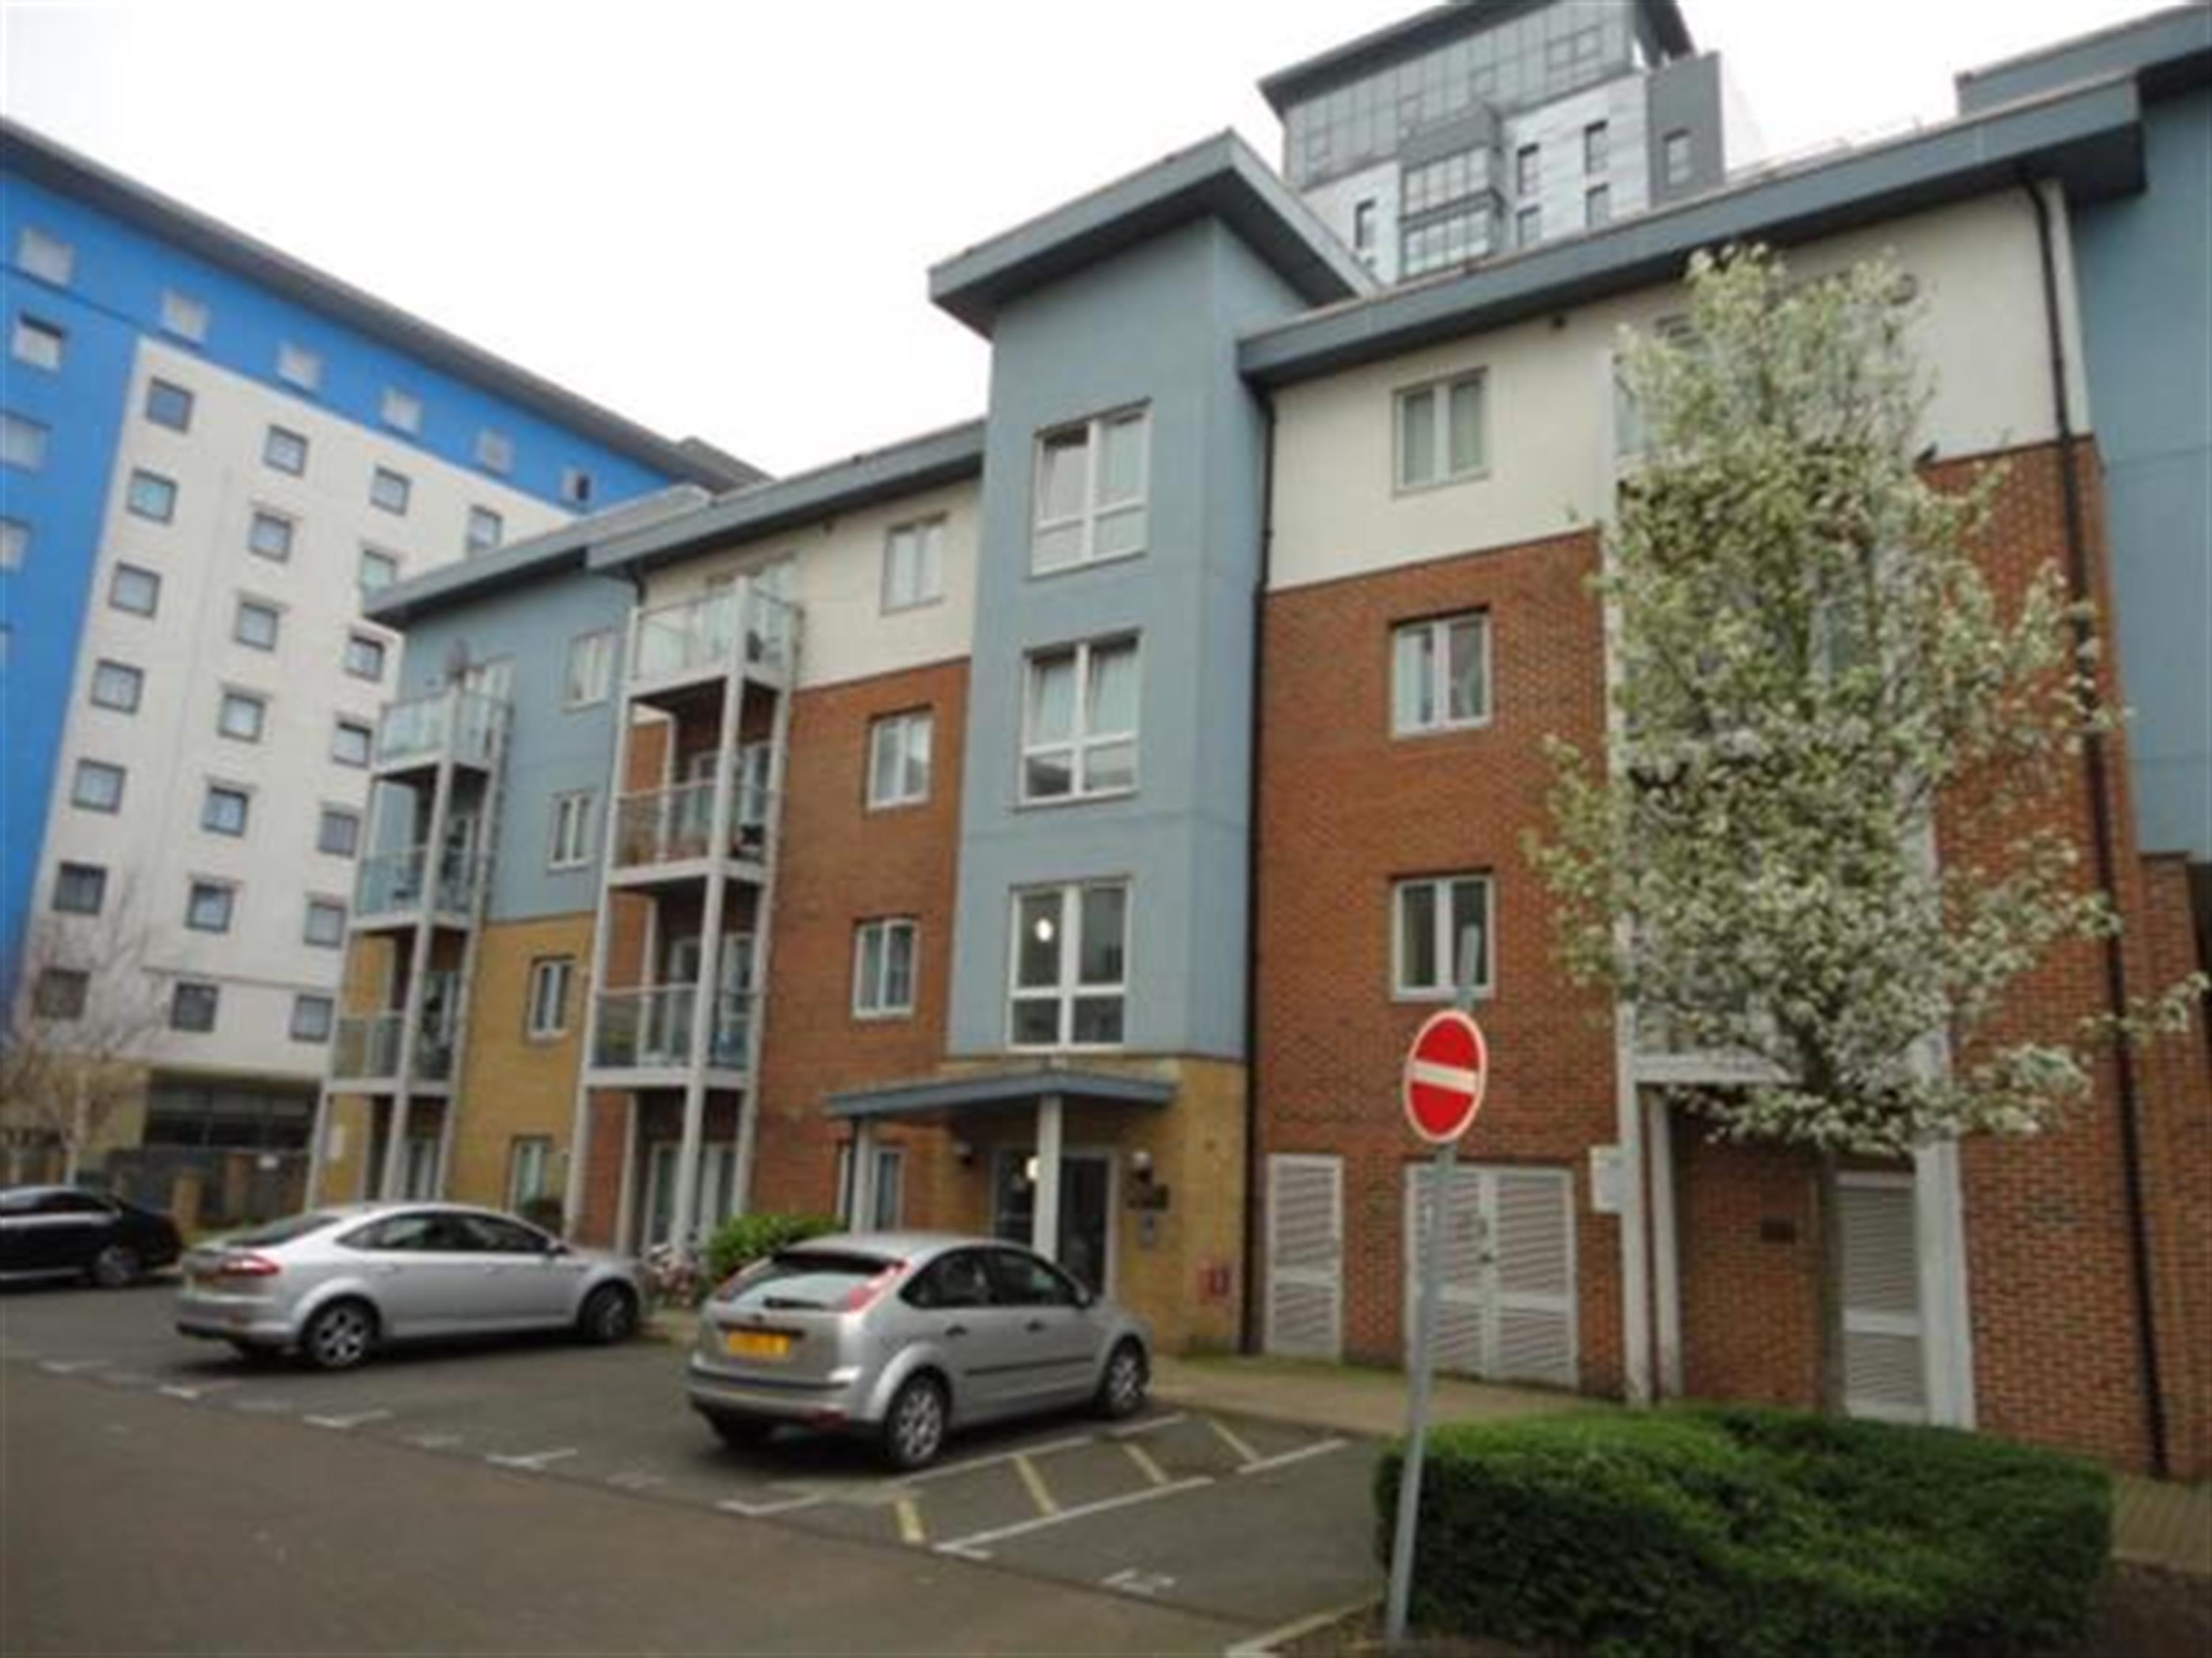 Foundry Court, Mill Place, Slough, Berkshire, SL2 5FZ